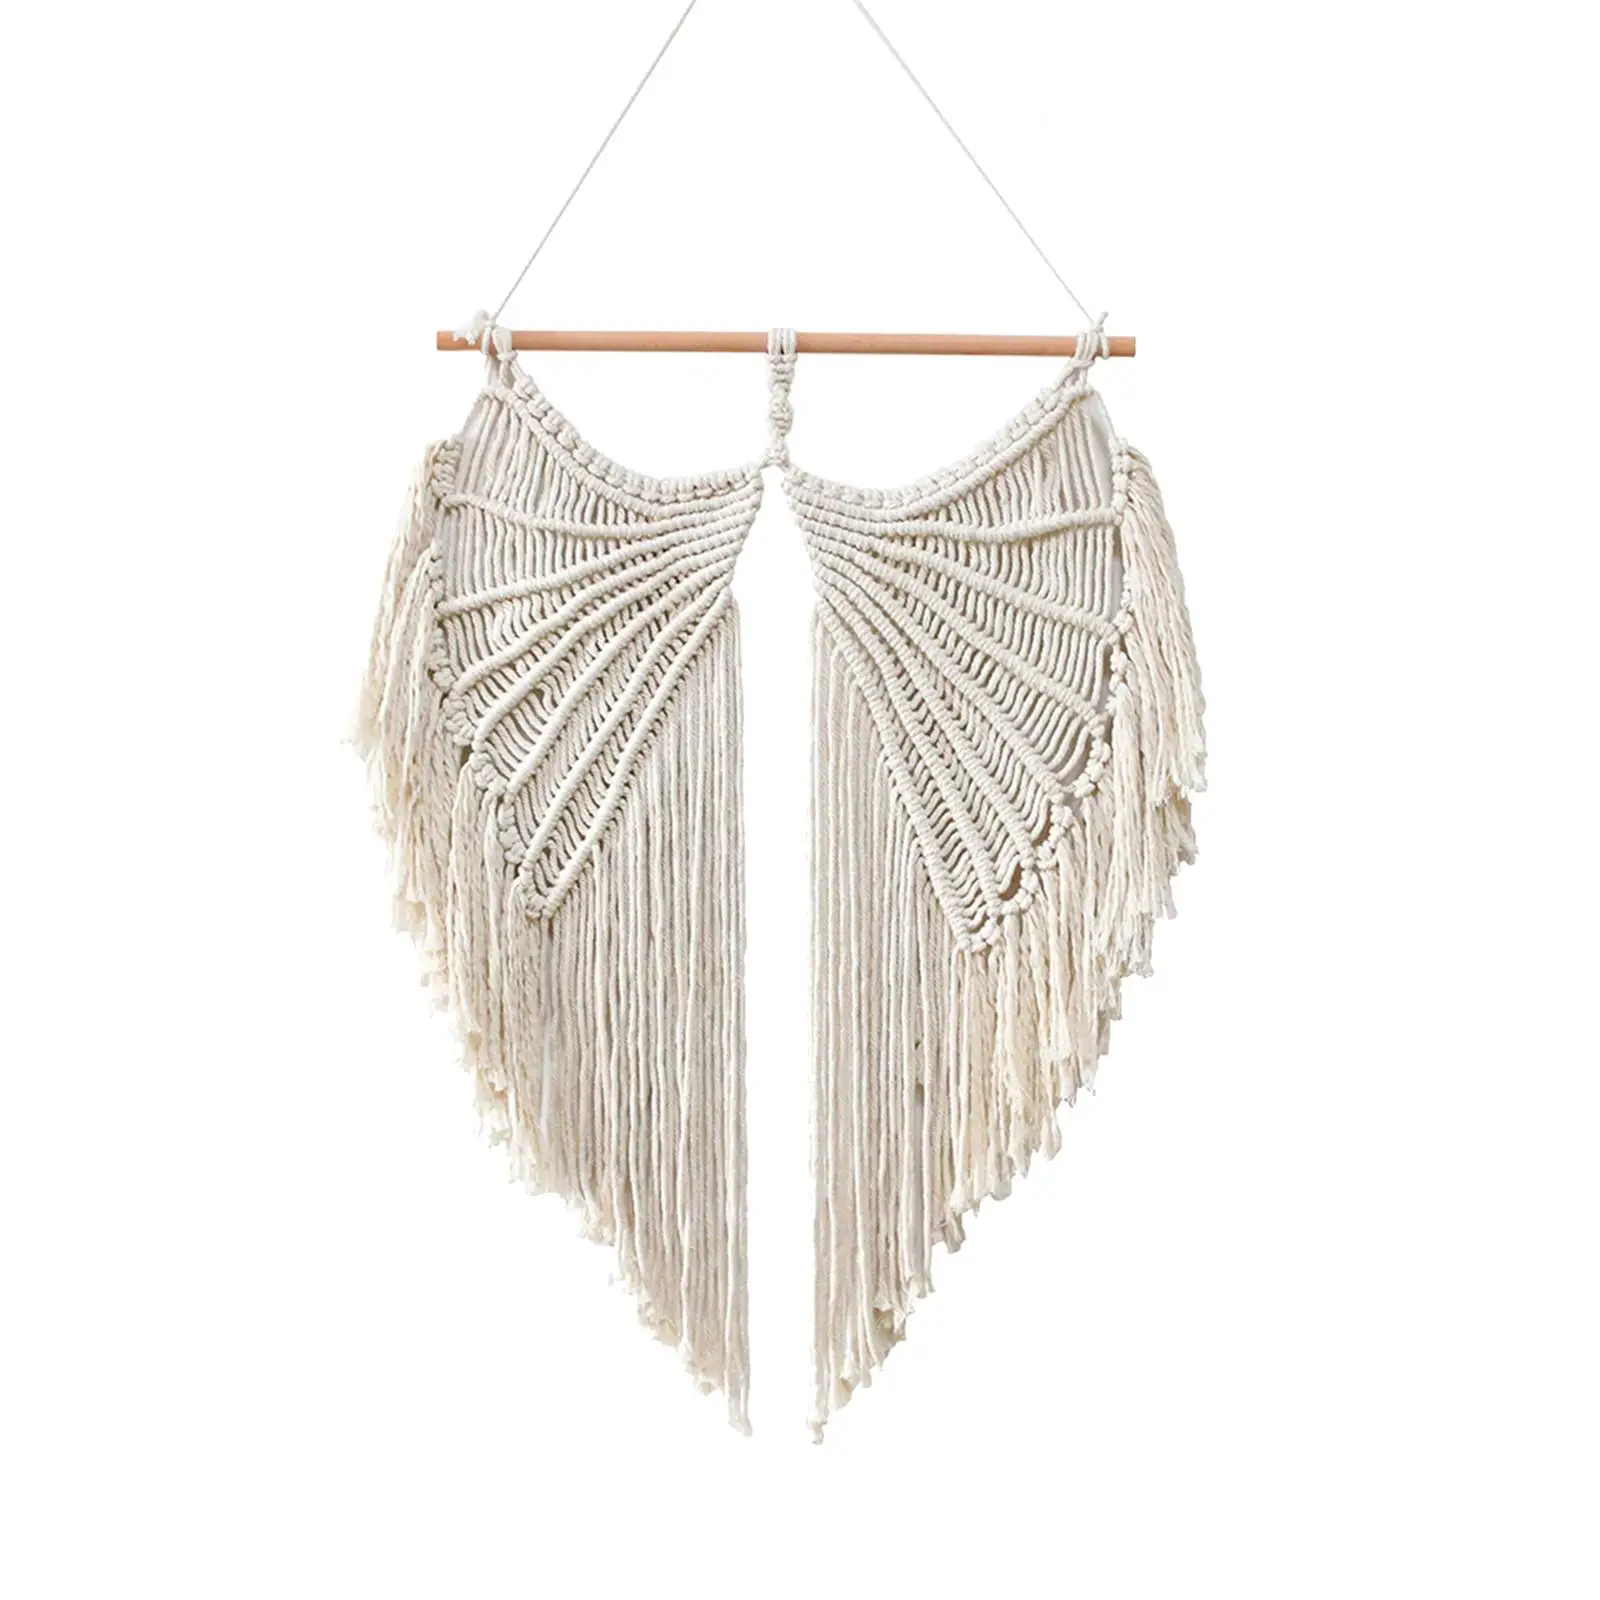 Macrame Wall Hanging Fringe Tassel Decoration Accents Angel Wing Tapestry Bohemian Woven for Home Party Dorm Bedroom Apartment